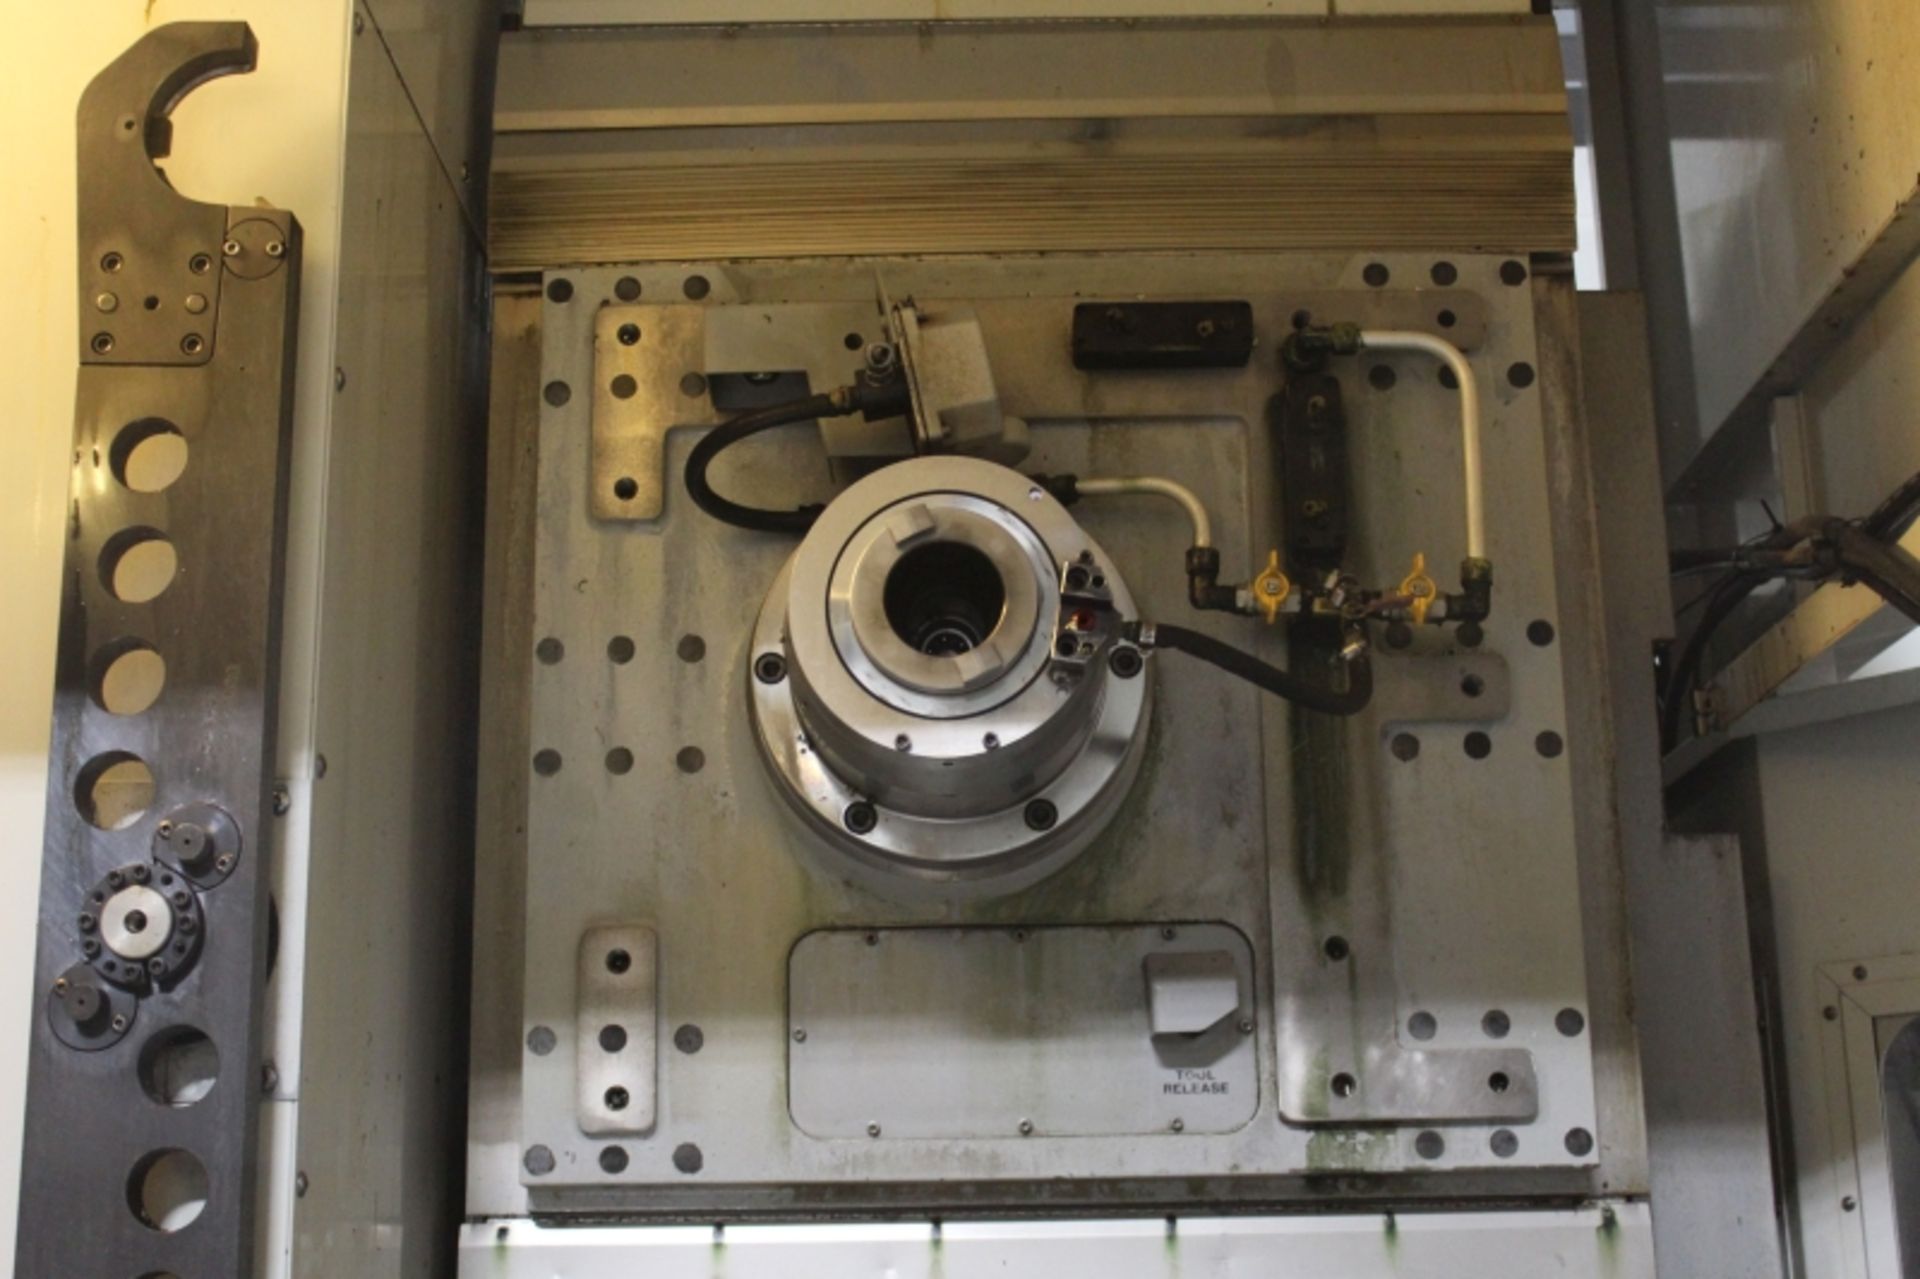 Haas EC-1600-4X, 5-Axis, 64” x 50” x 32” trvls, 7500 RPM, CT50, 30 ATC, CTS, S/N 2052737, New - Image 11 of 13